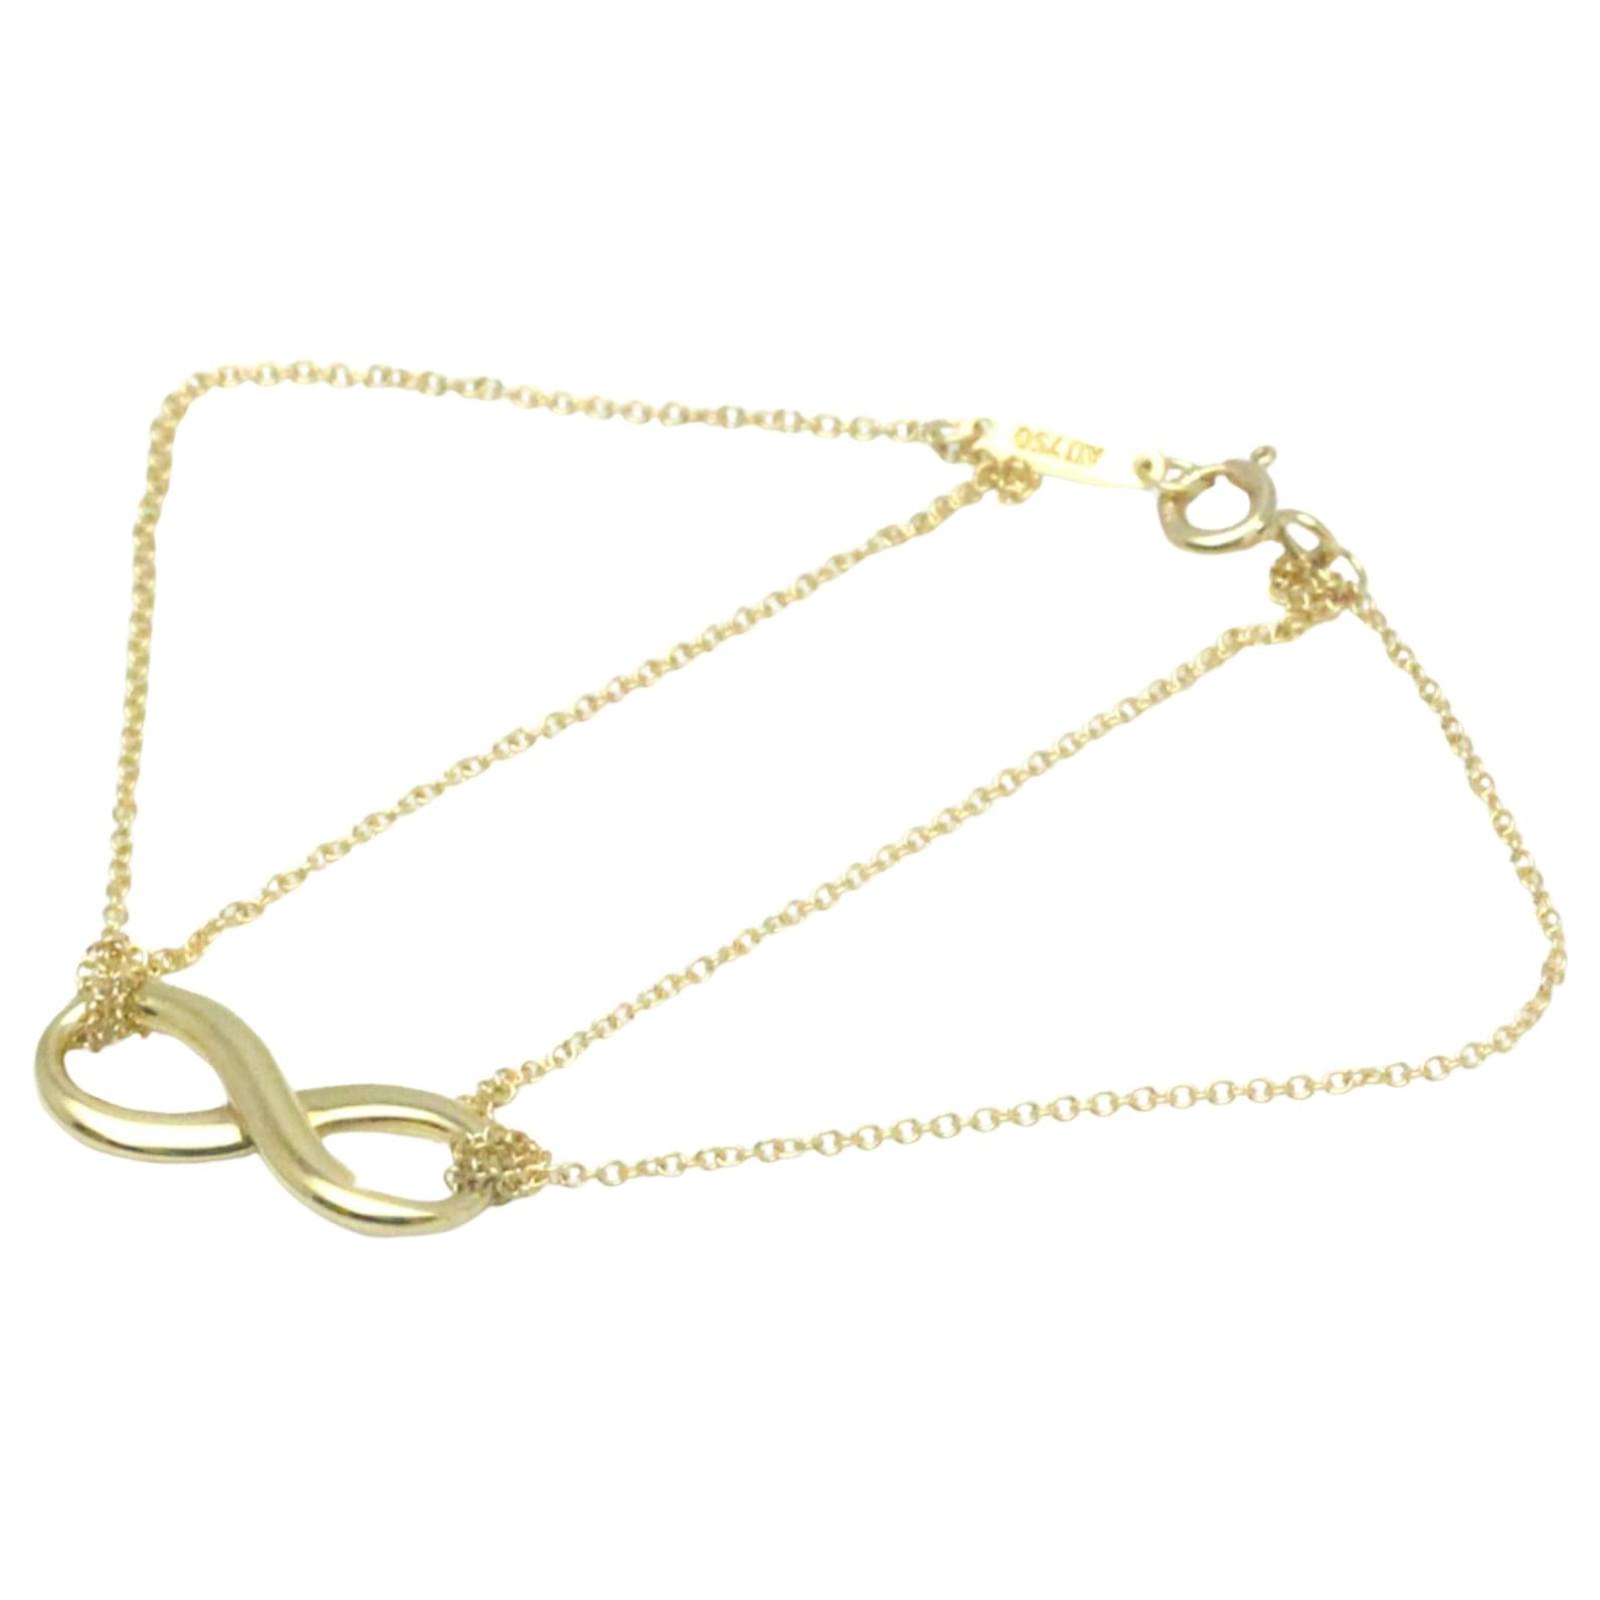 Tiffany & Co. Double Heart Infinity Necklace – purchasegarments